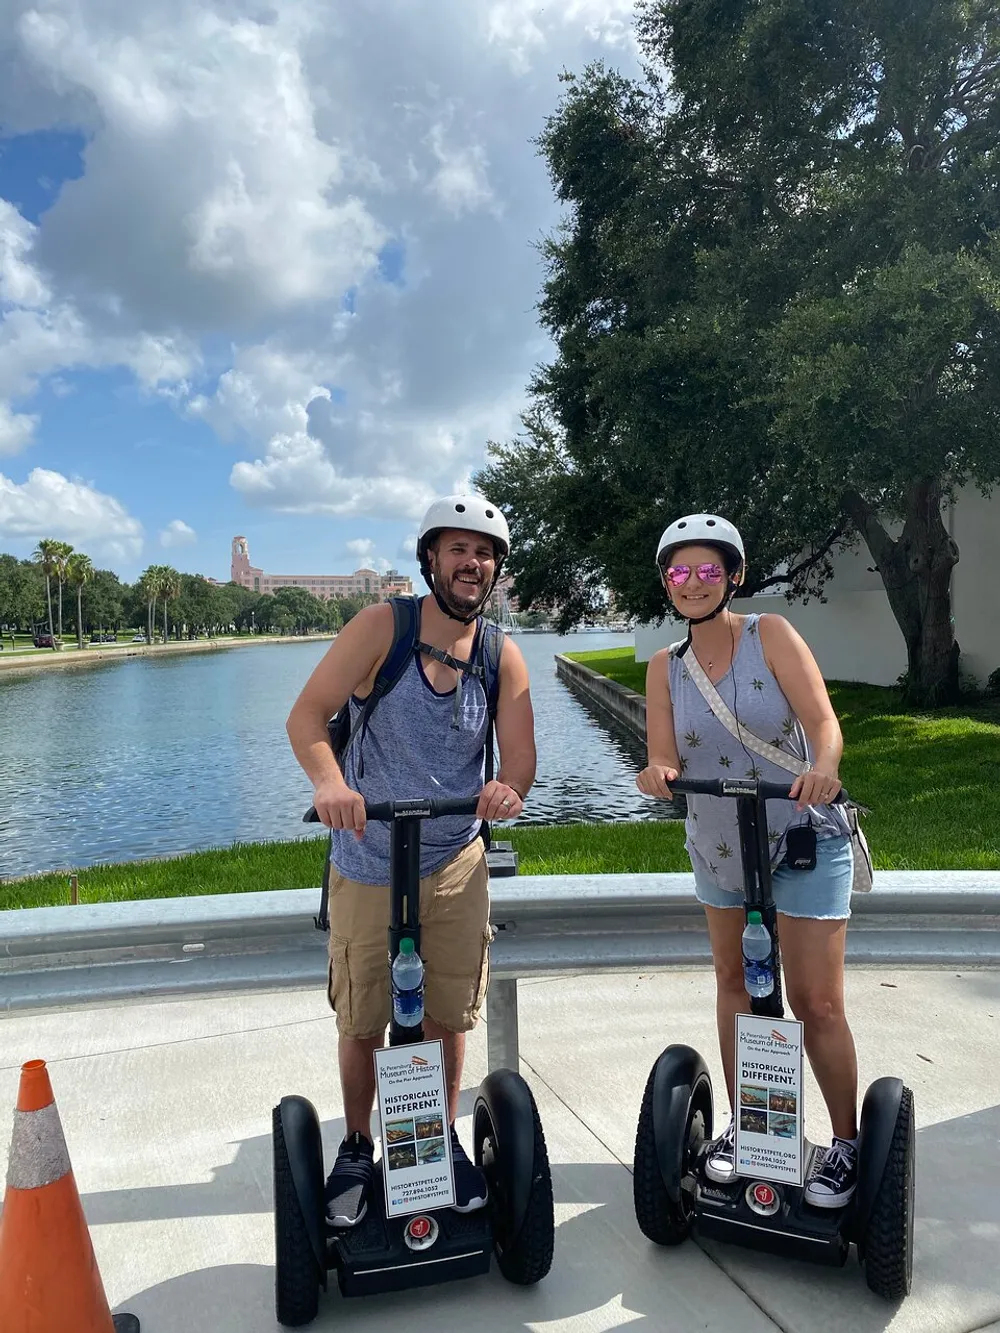 A man and a woman are smiling for the camera while standing on Segways near a waterway with lush greenery and a clear blue sky in the background